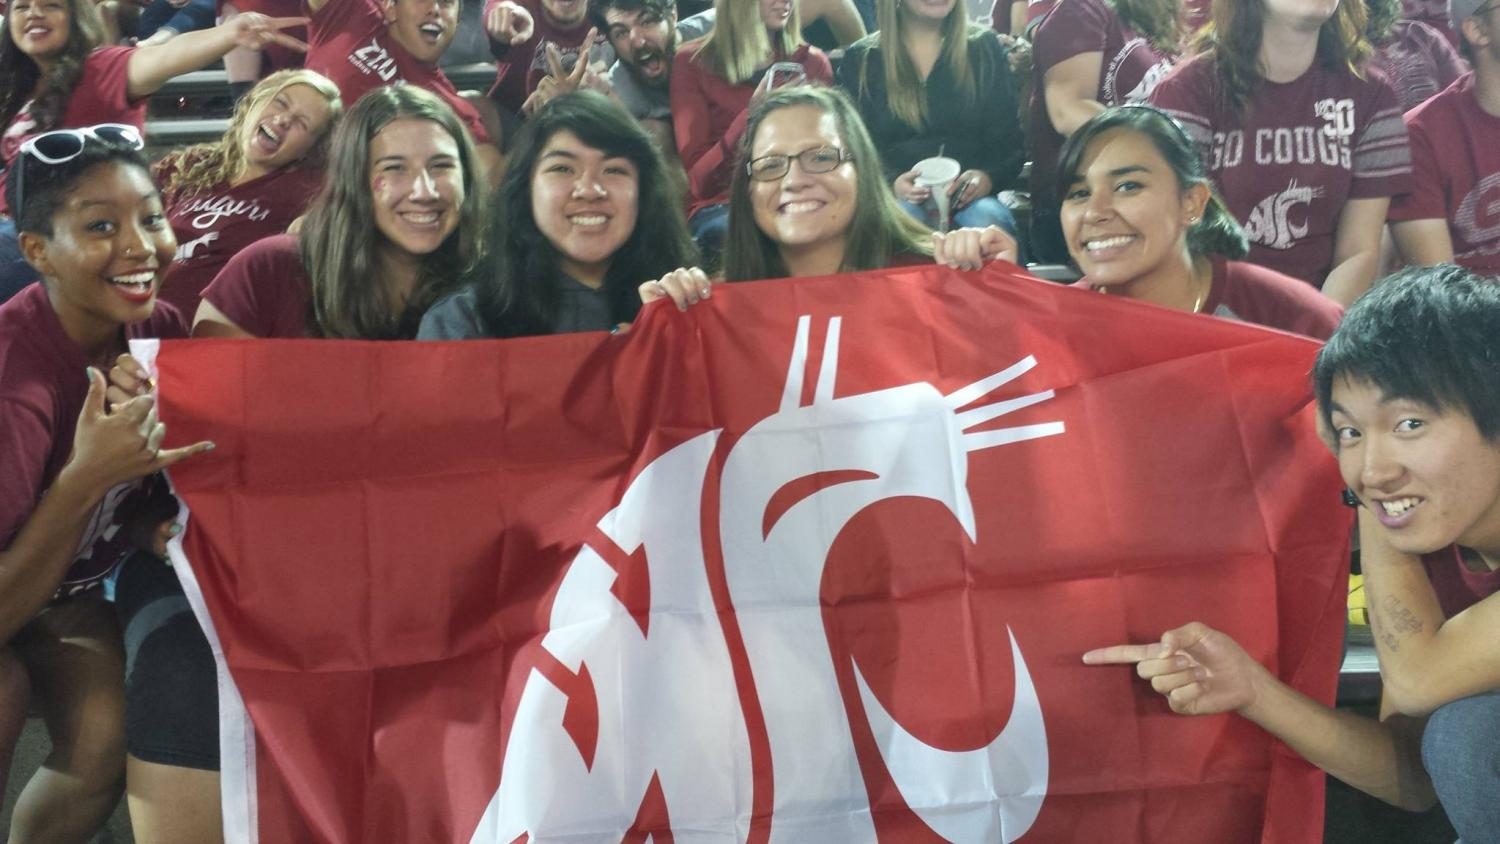 Mint editor Jennifer Ladwig, second from left, at a WSU football game on Sept. 20, 2014. The best photo bomb in history. Go Cougs.